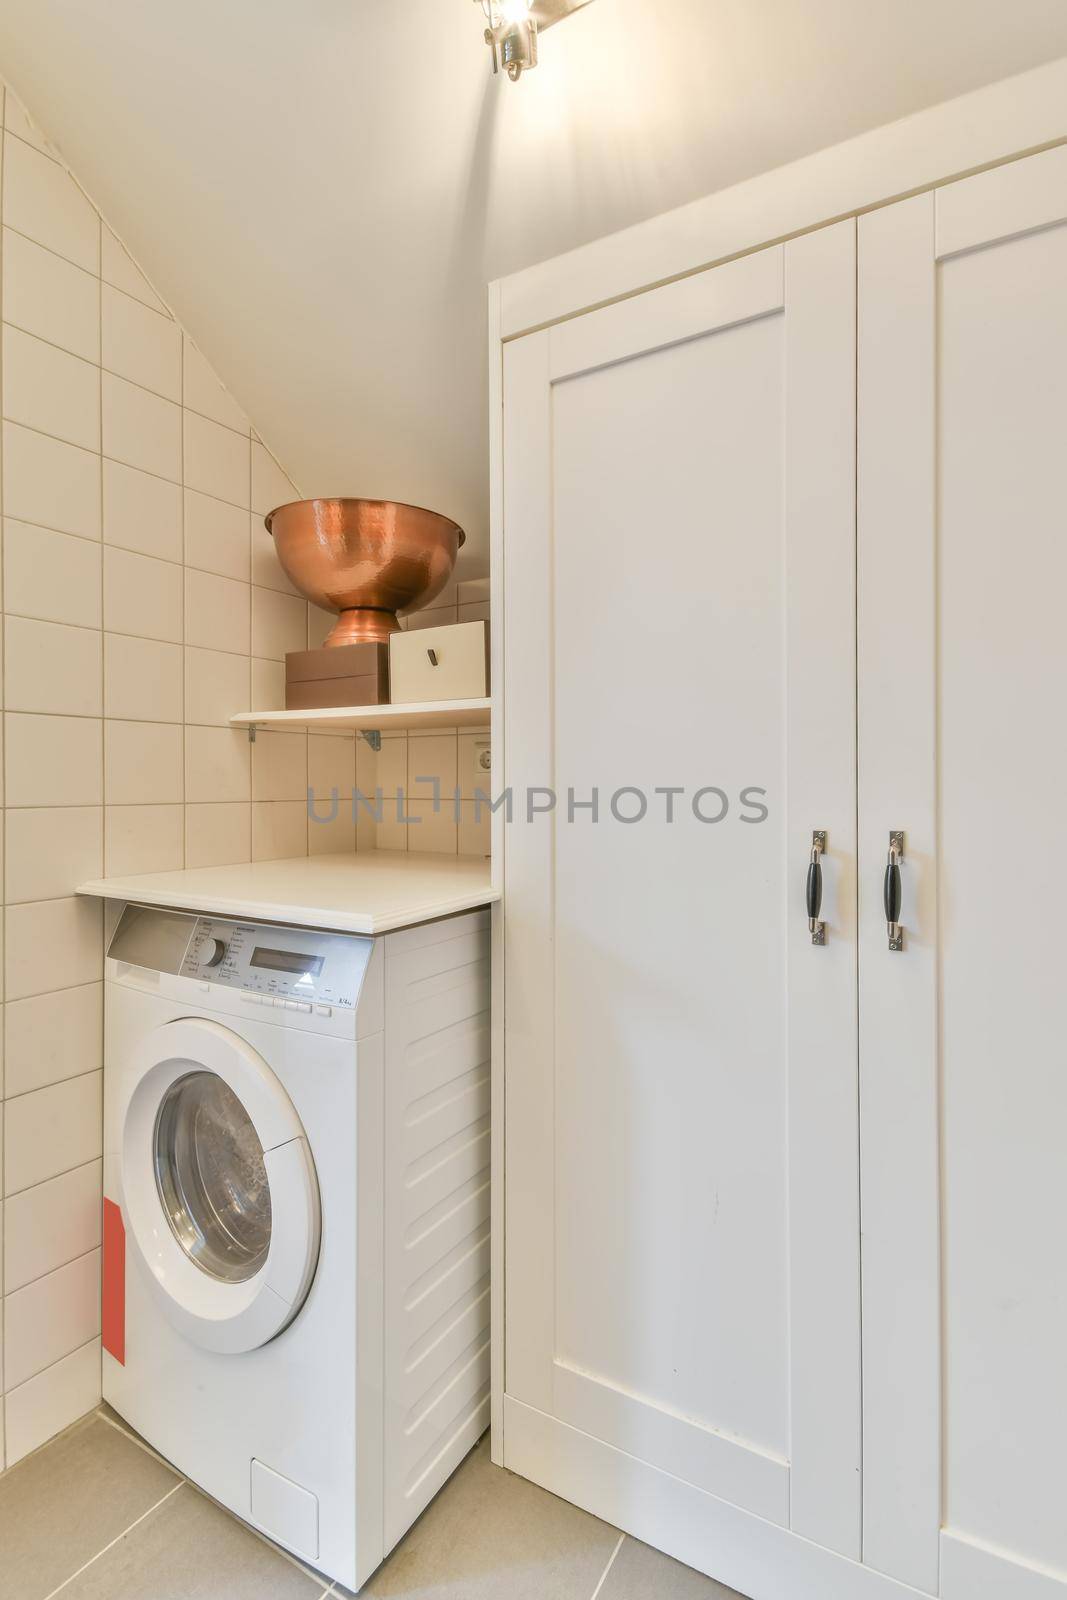 The interior of a laundry room by casamedia